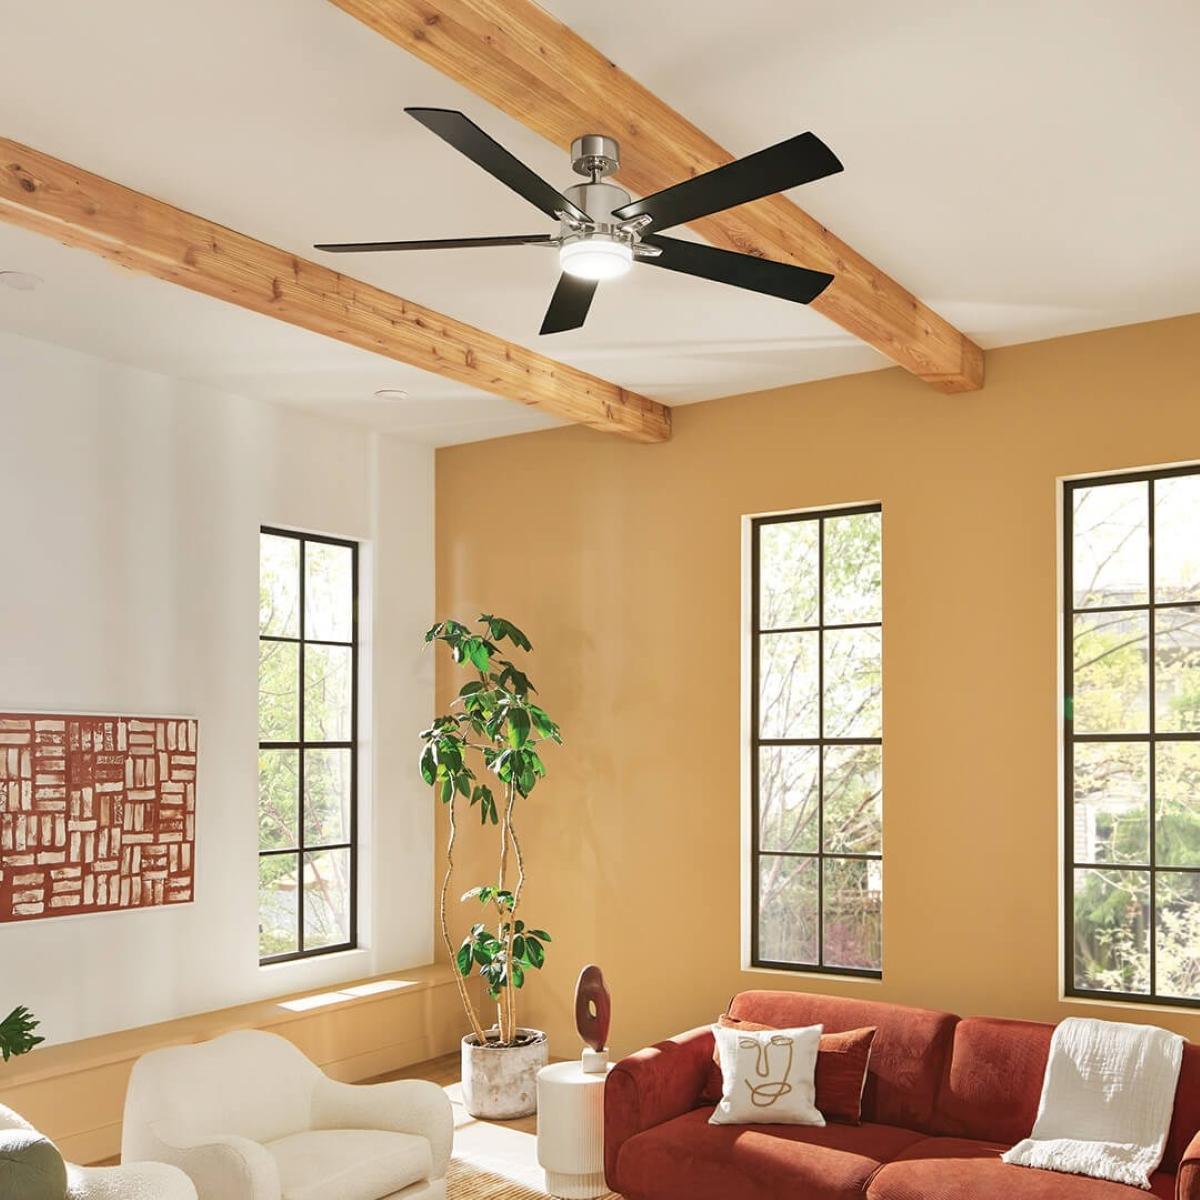 Lucian Elite 60 Inch Ceiling Fan With Light, Wall Control Included